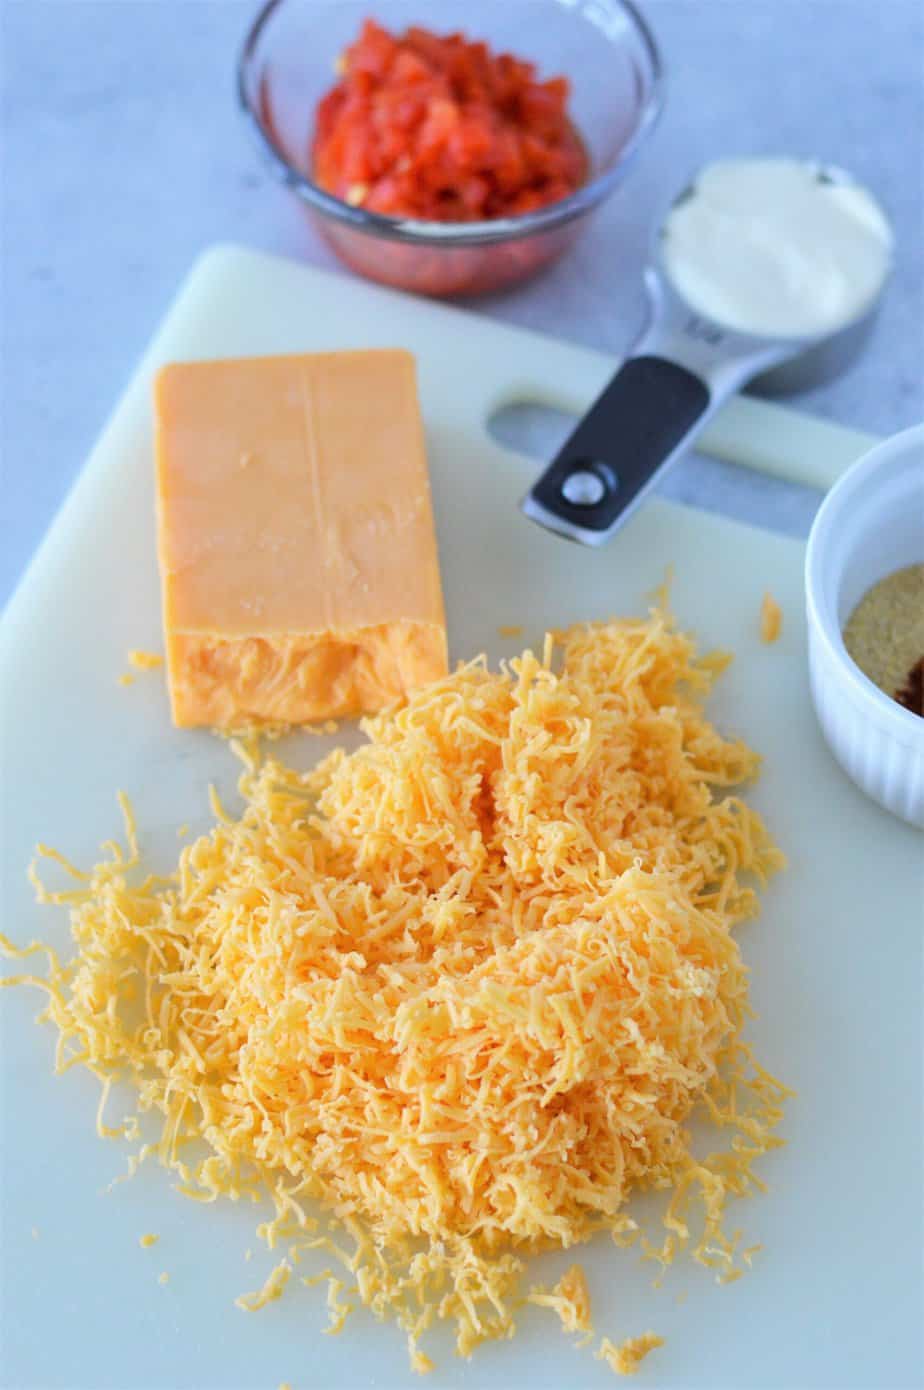 shredded cheddar cheese on cutting board and other ingredients for pimento cheese